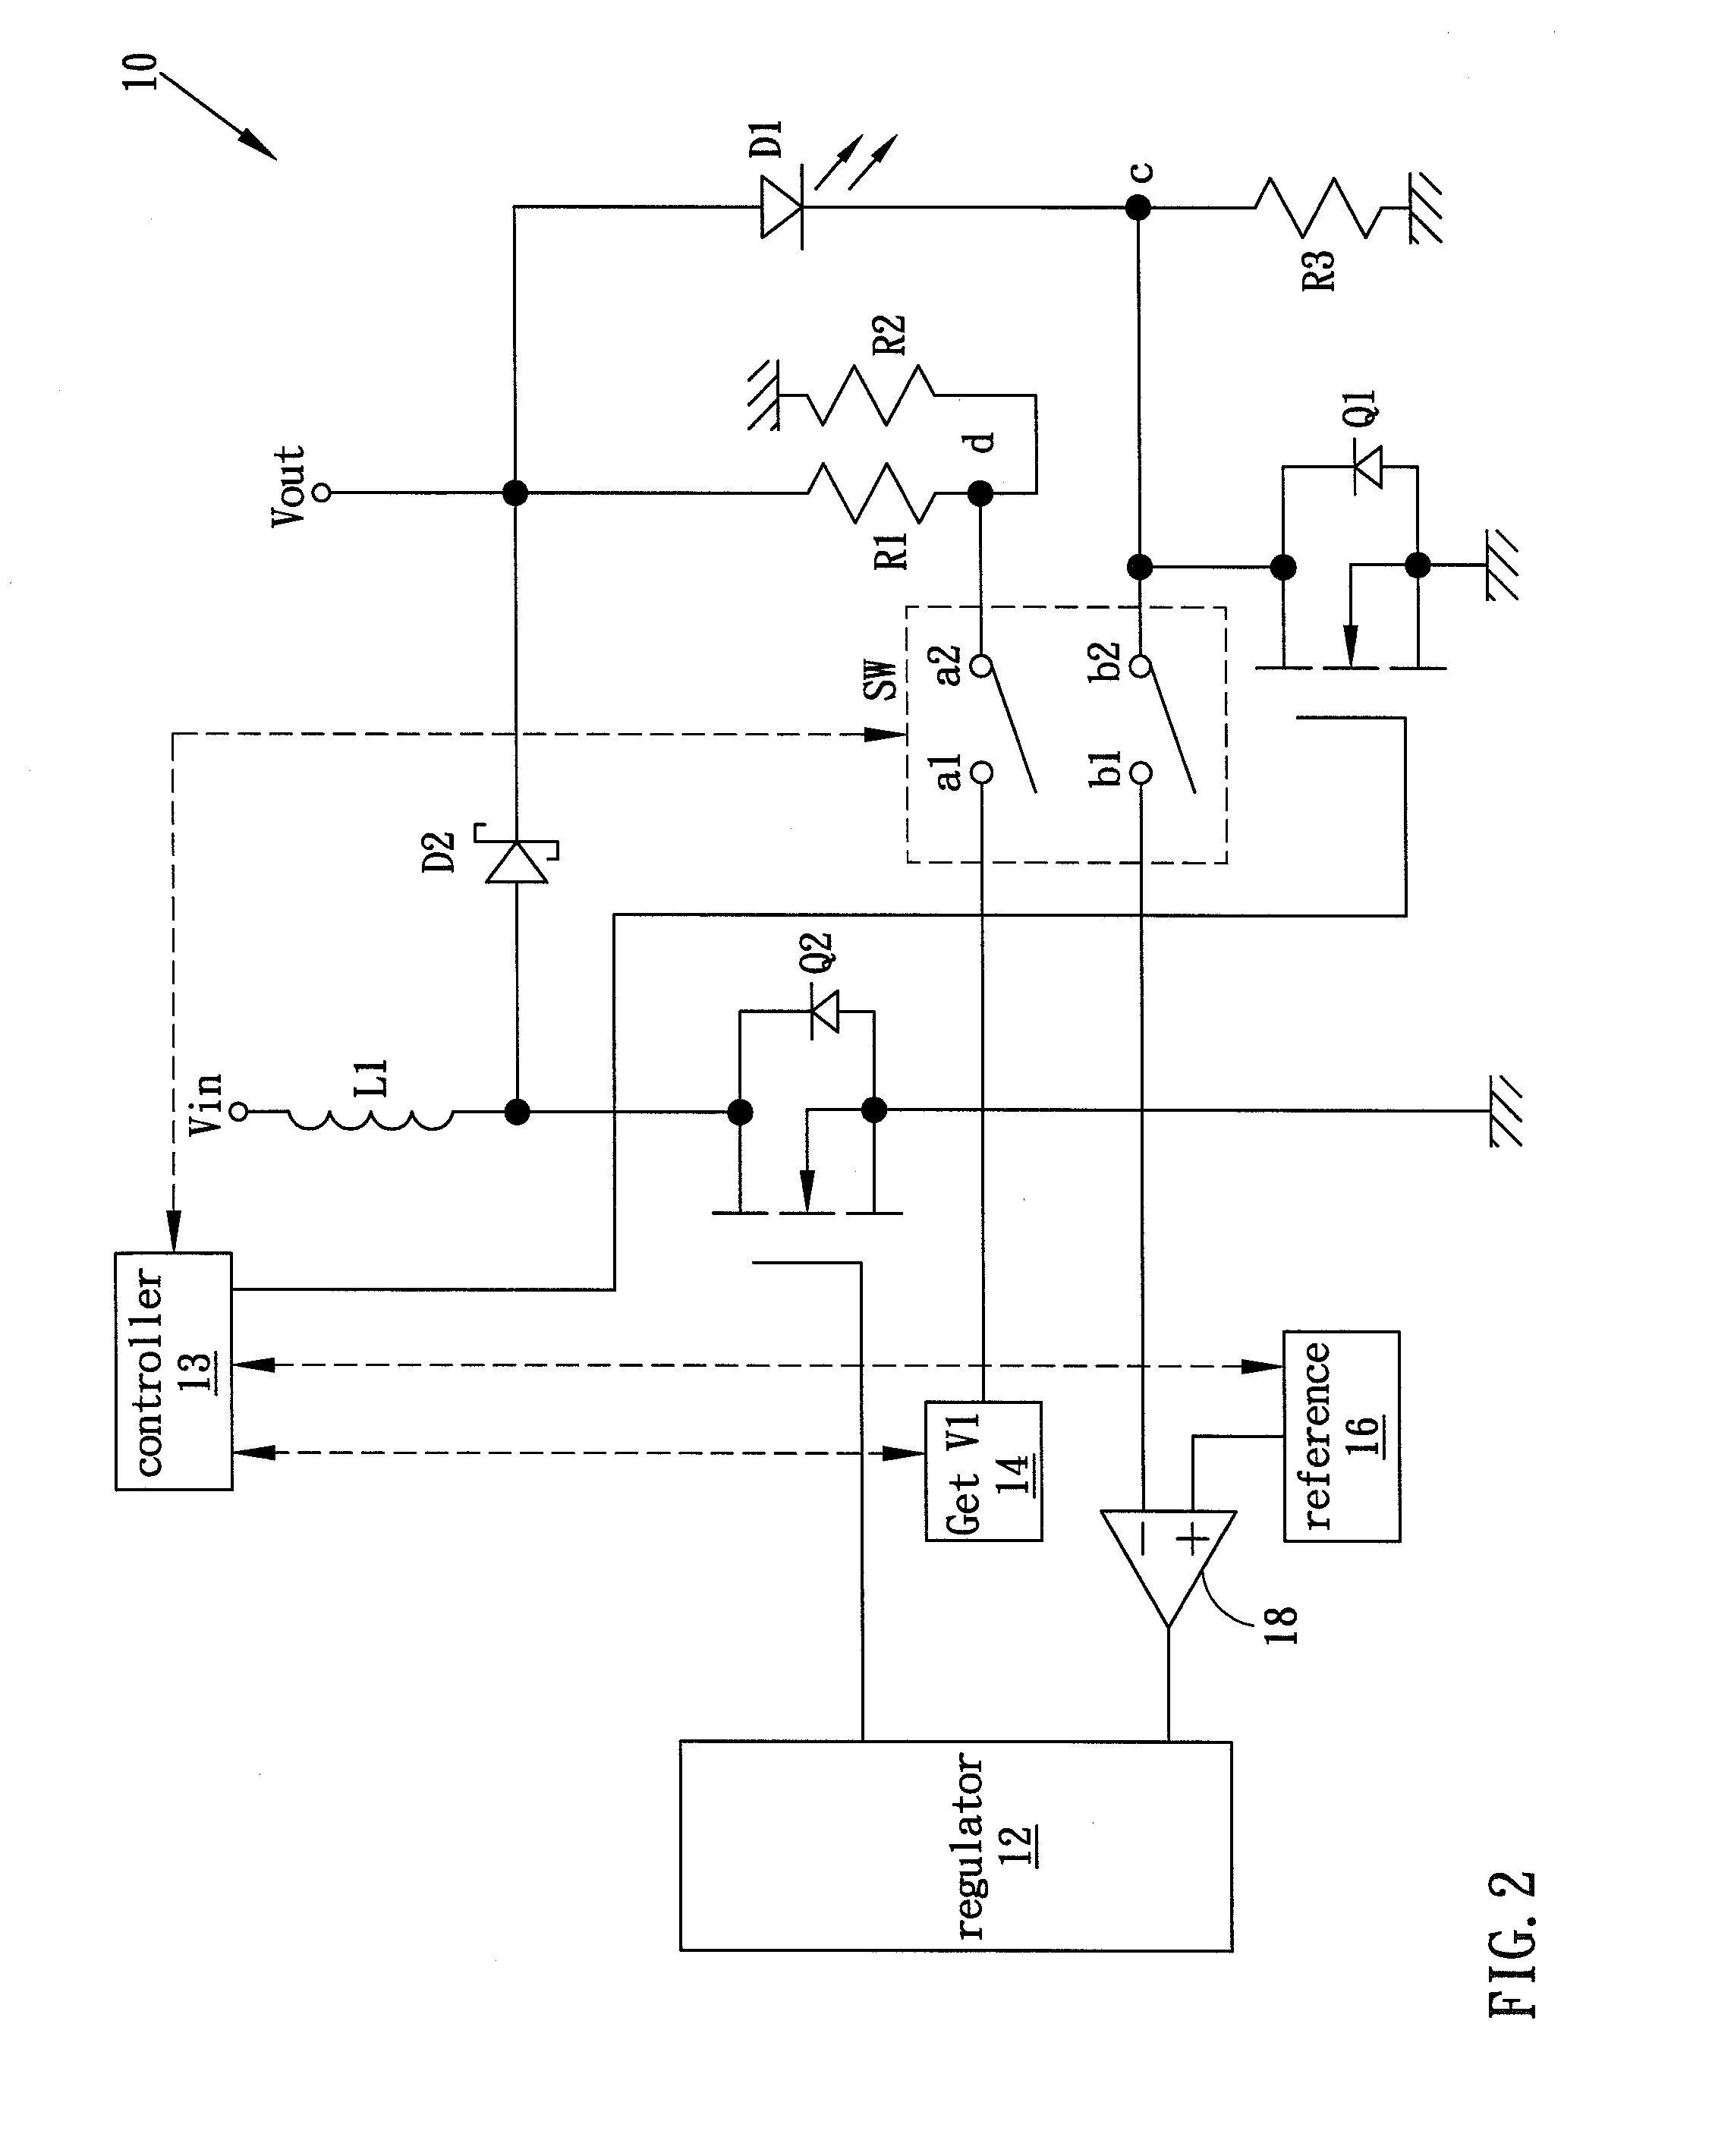 System and Method for Driving LED with High Efficiency in Power Consumption